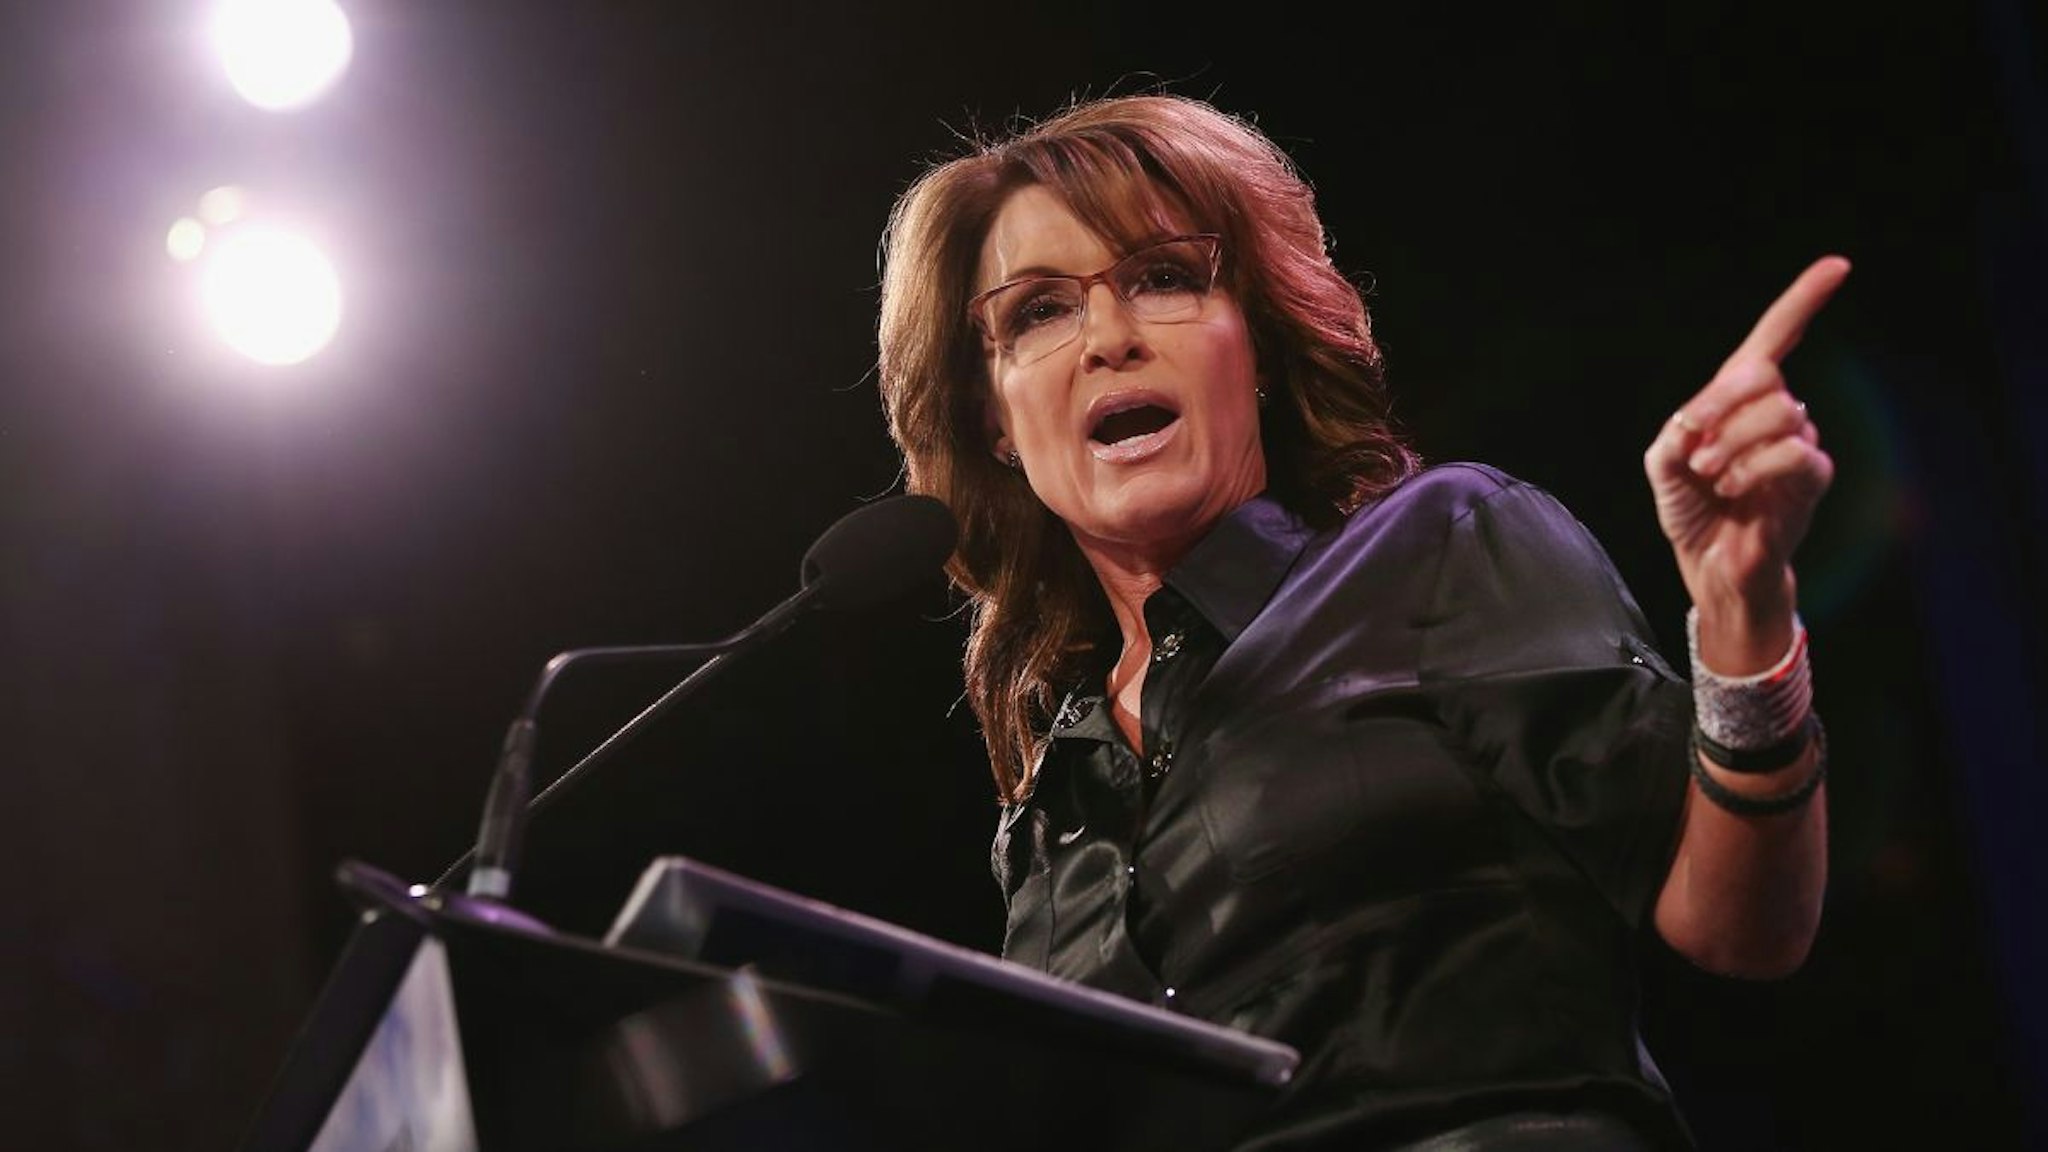 Former Alaska Governor Sarah Palin speaks to guests at the Iowa Freedom Summit on January 24, 2015 in Des Moines, Iowa.